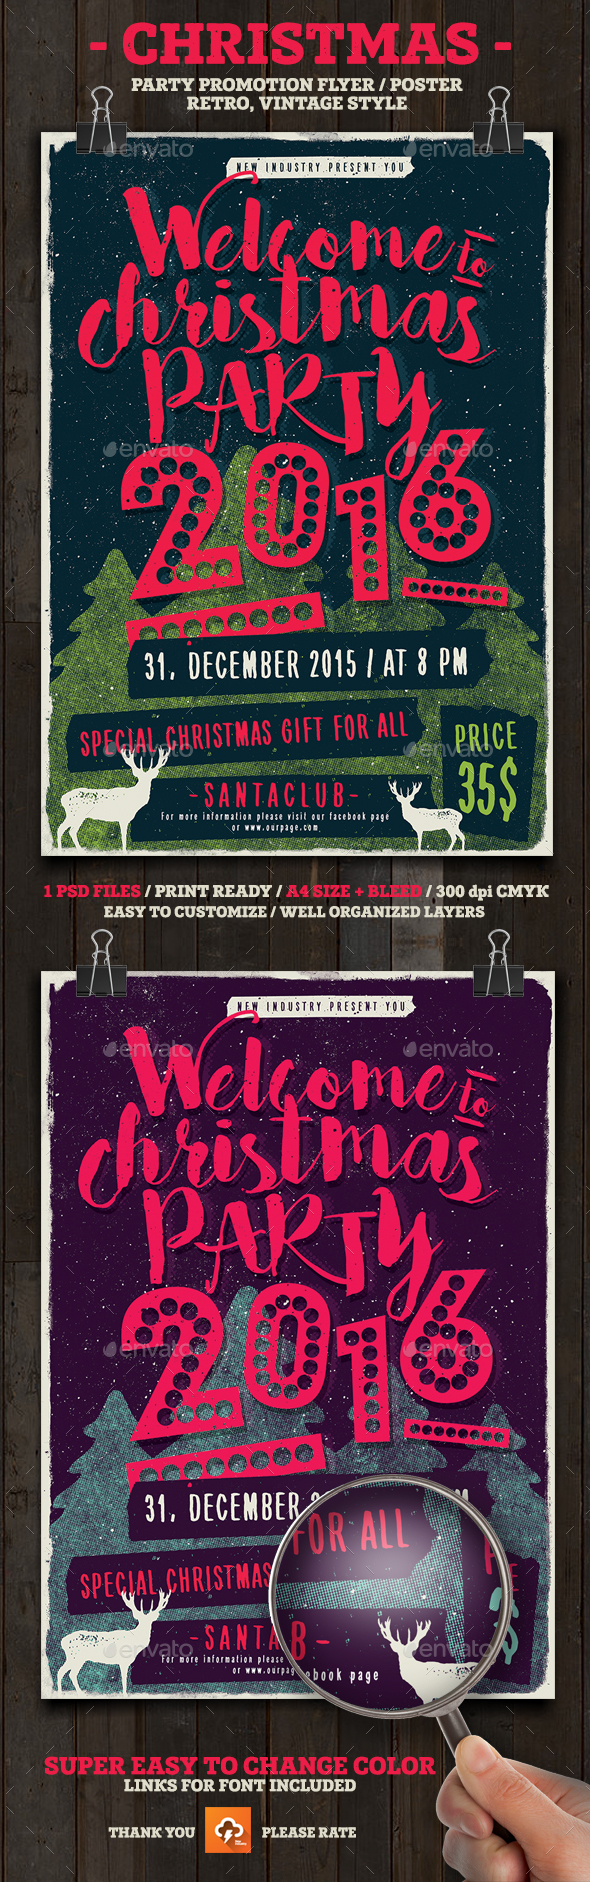 Christmas Party Poster/Flyer